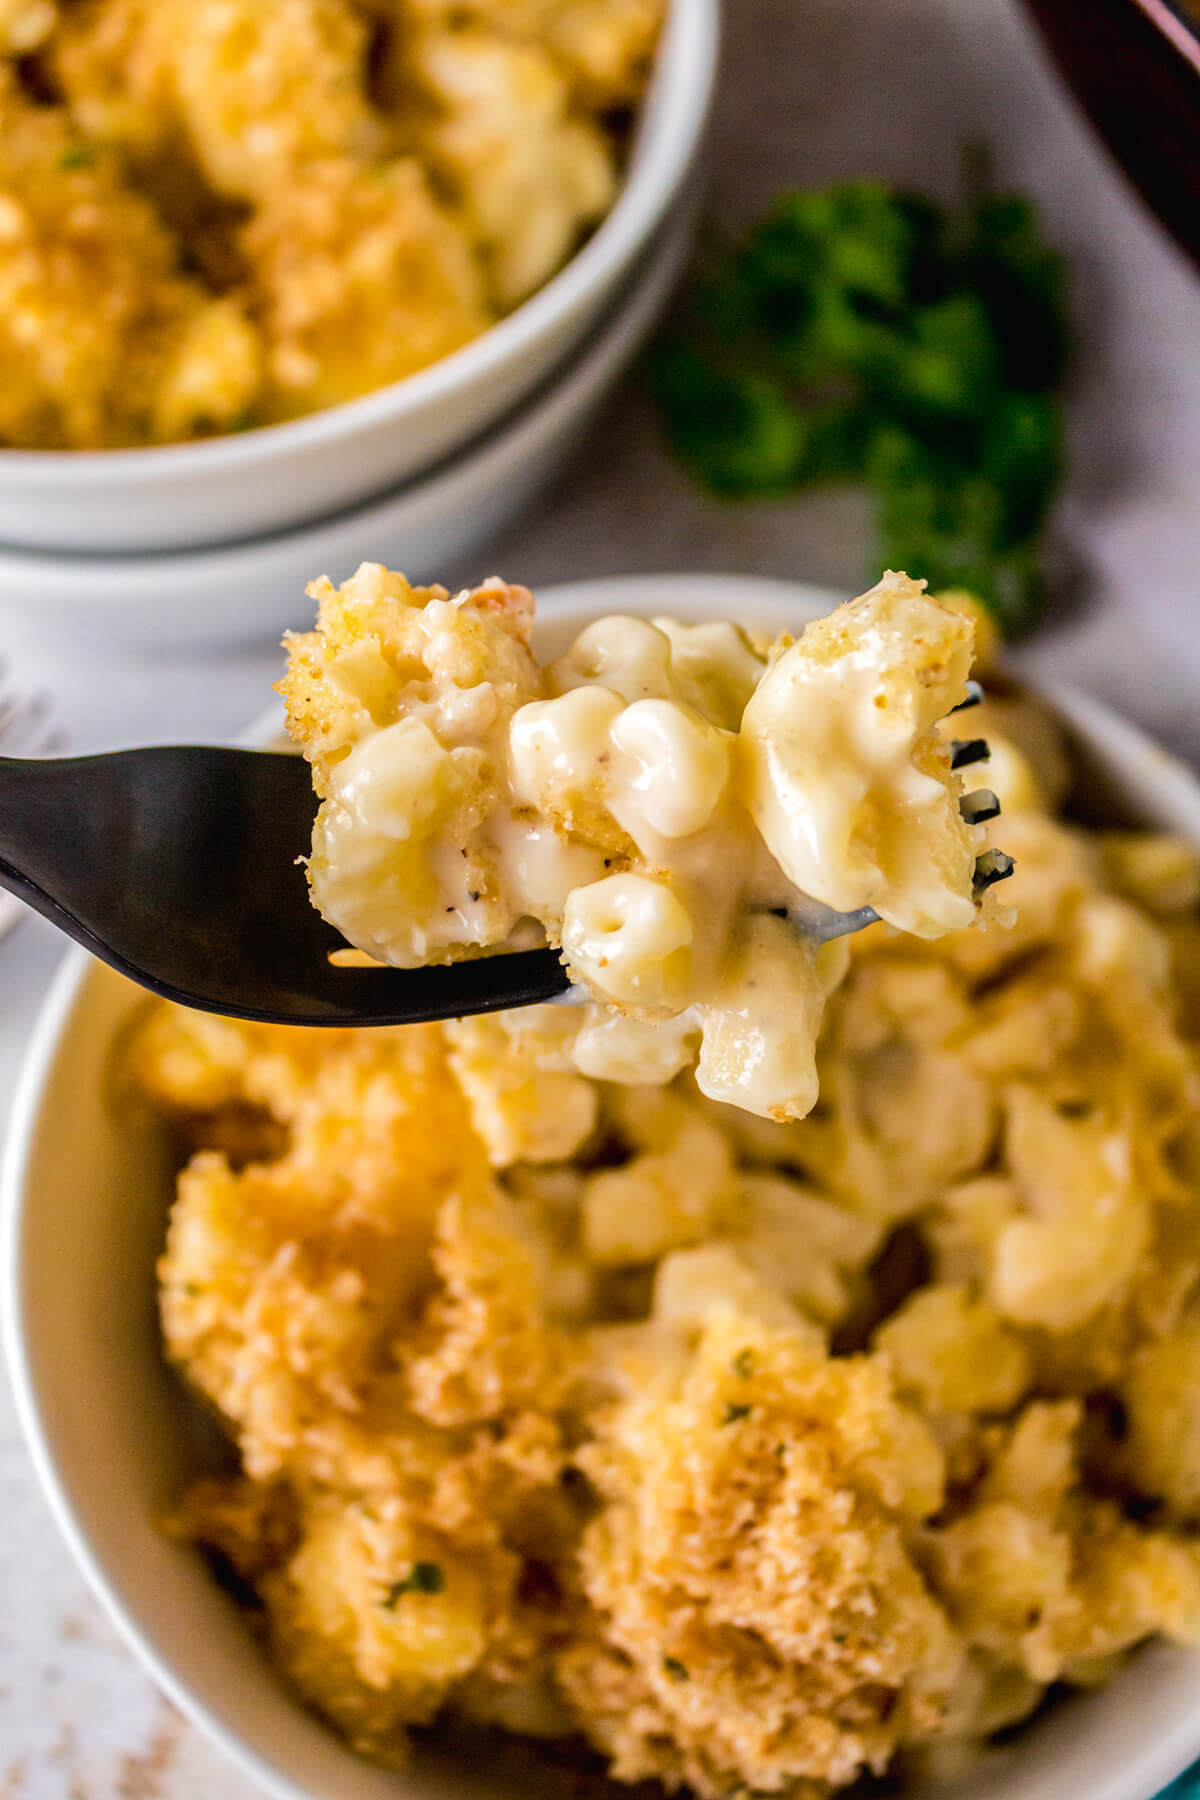 A forkful of creamy Smoked Mac and Cheese topped with toasted golden bread crumbs.